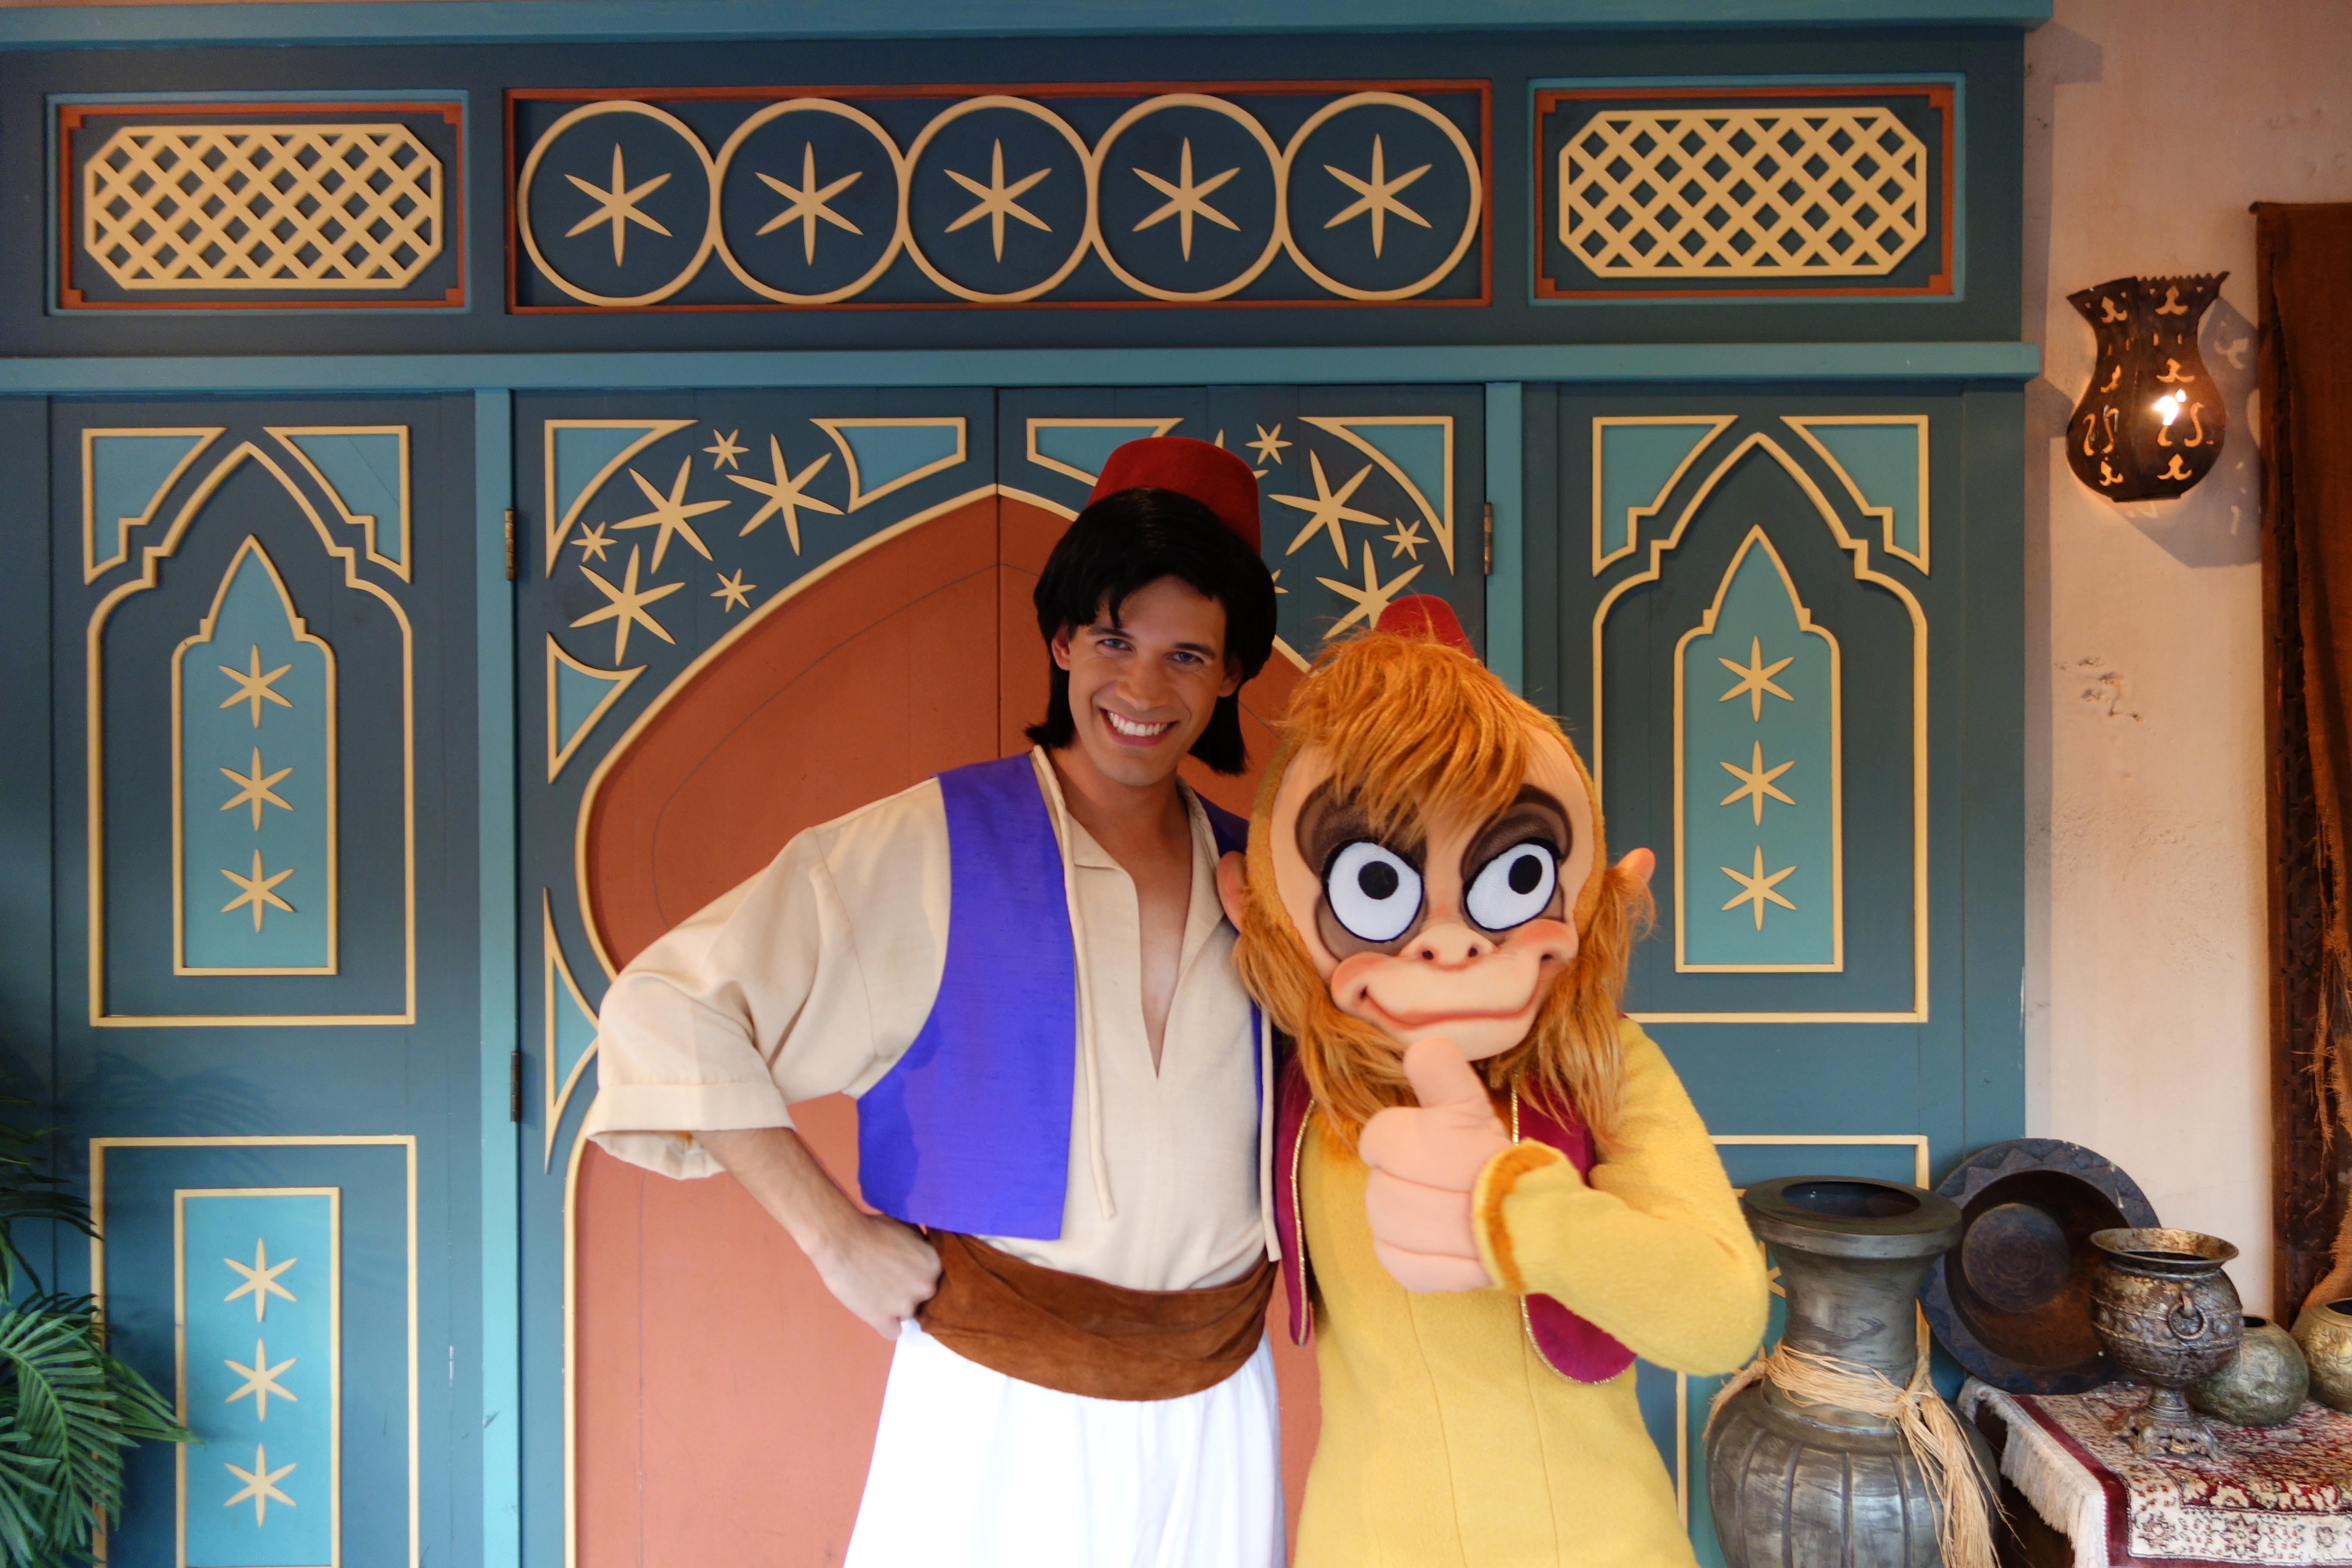 Abu and Aladdin at Mickey's Not So Scary Halloween Party in the Magic Kingdom Disney World Character meet and greet 2012